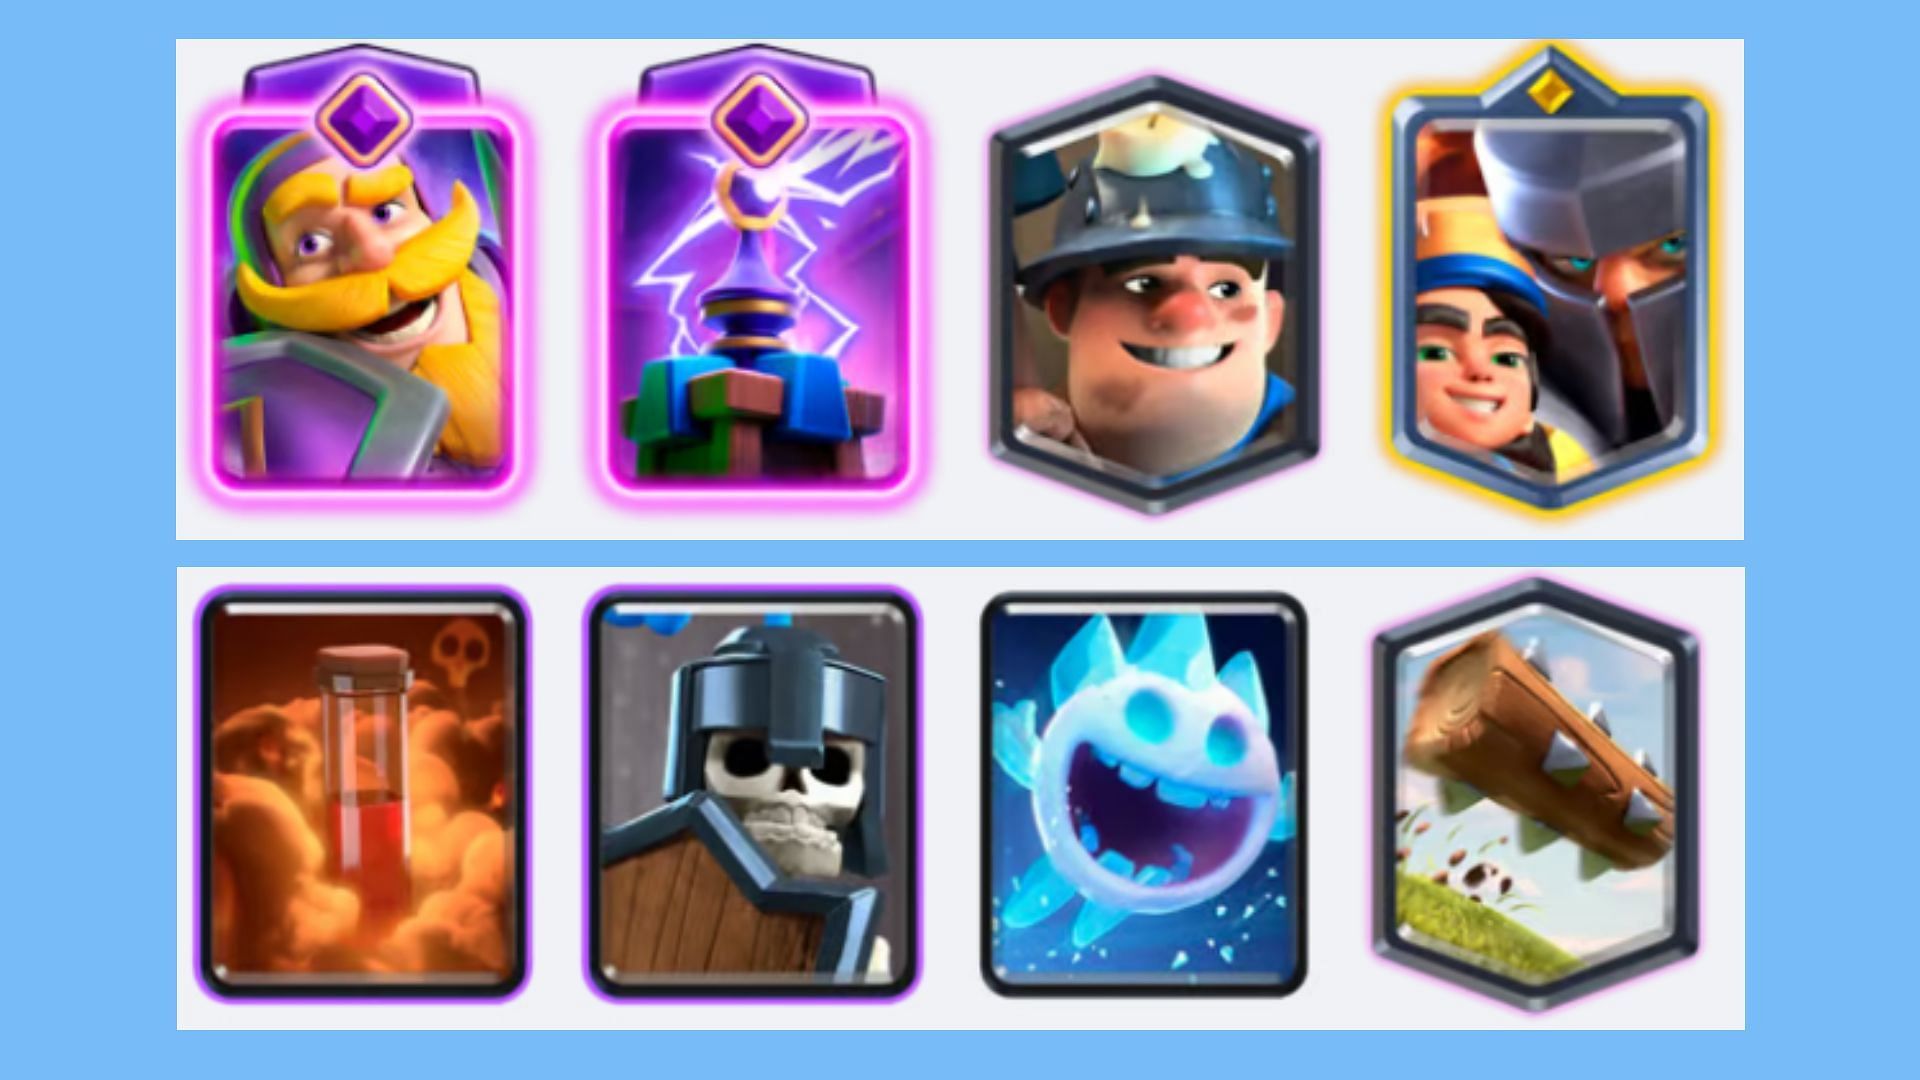 Knight - Poison deck (Image via Supercell)